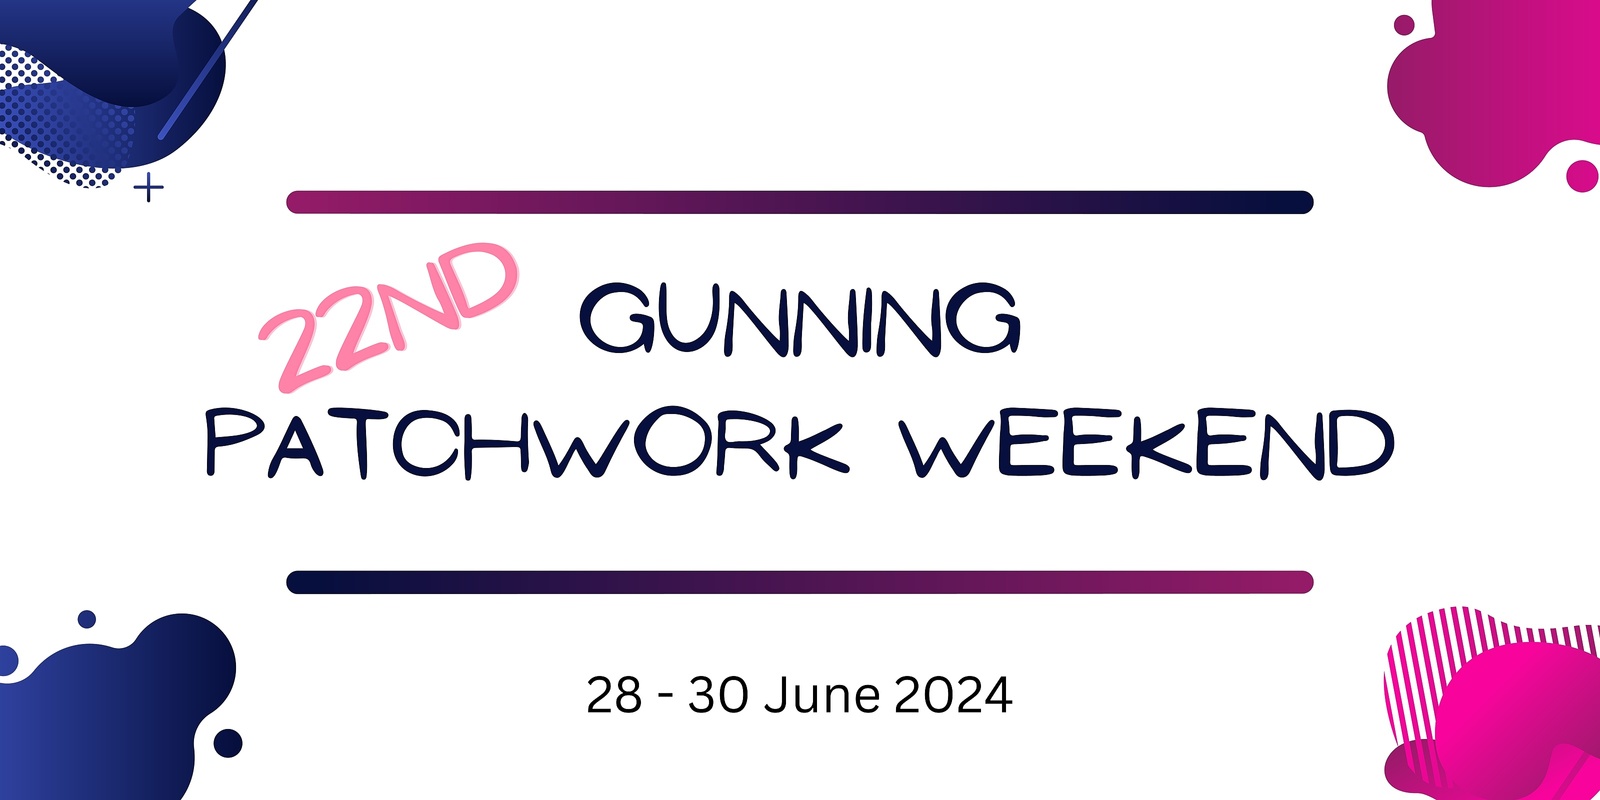 Banner image for 22nd Gunning Patchwork Weekend